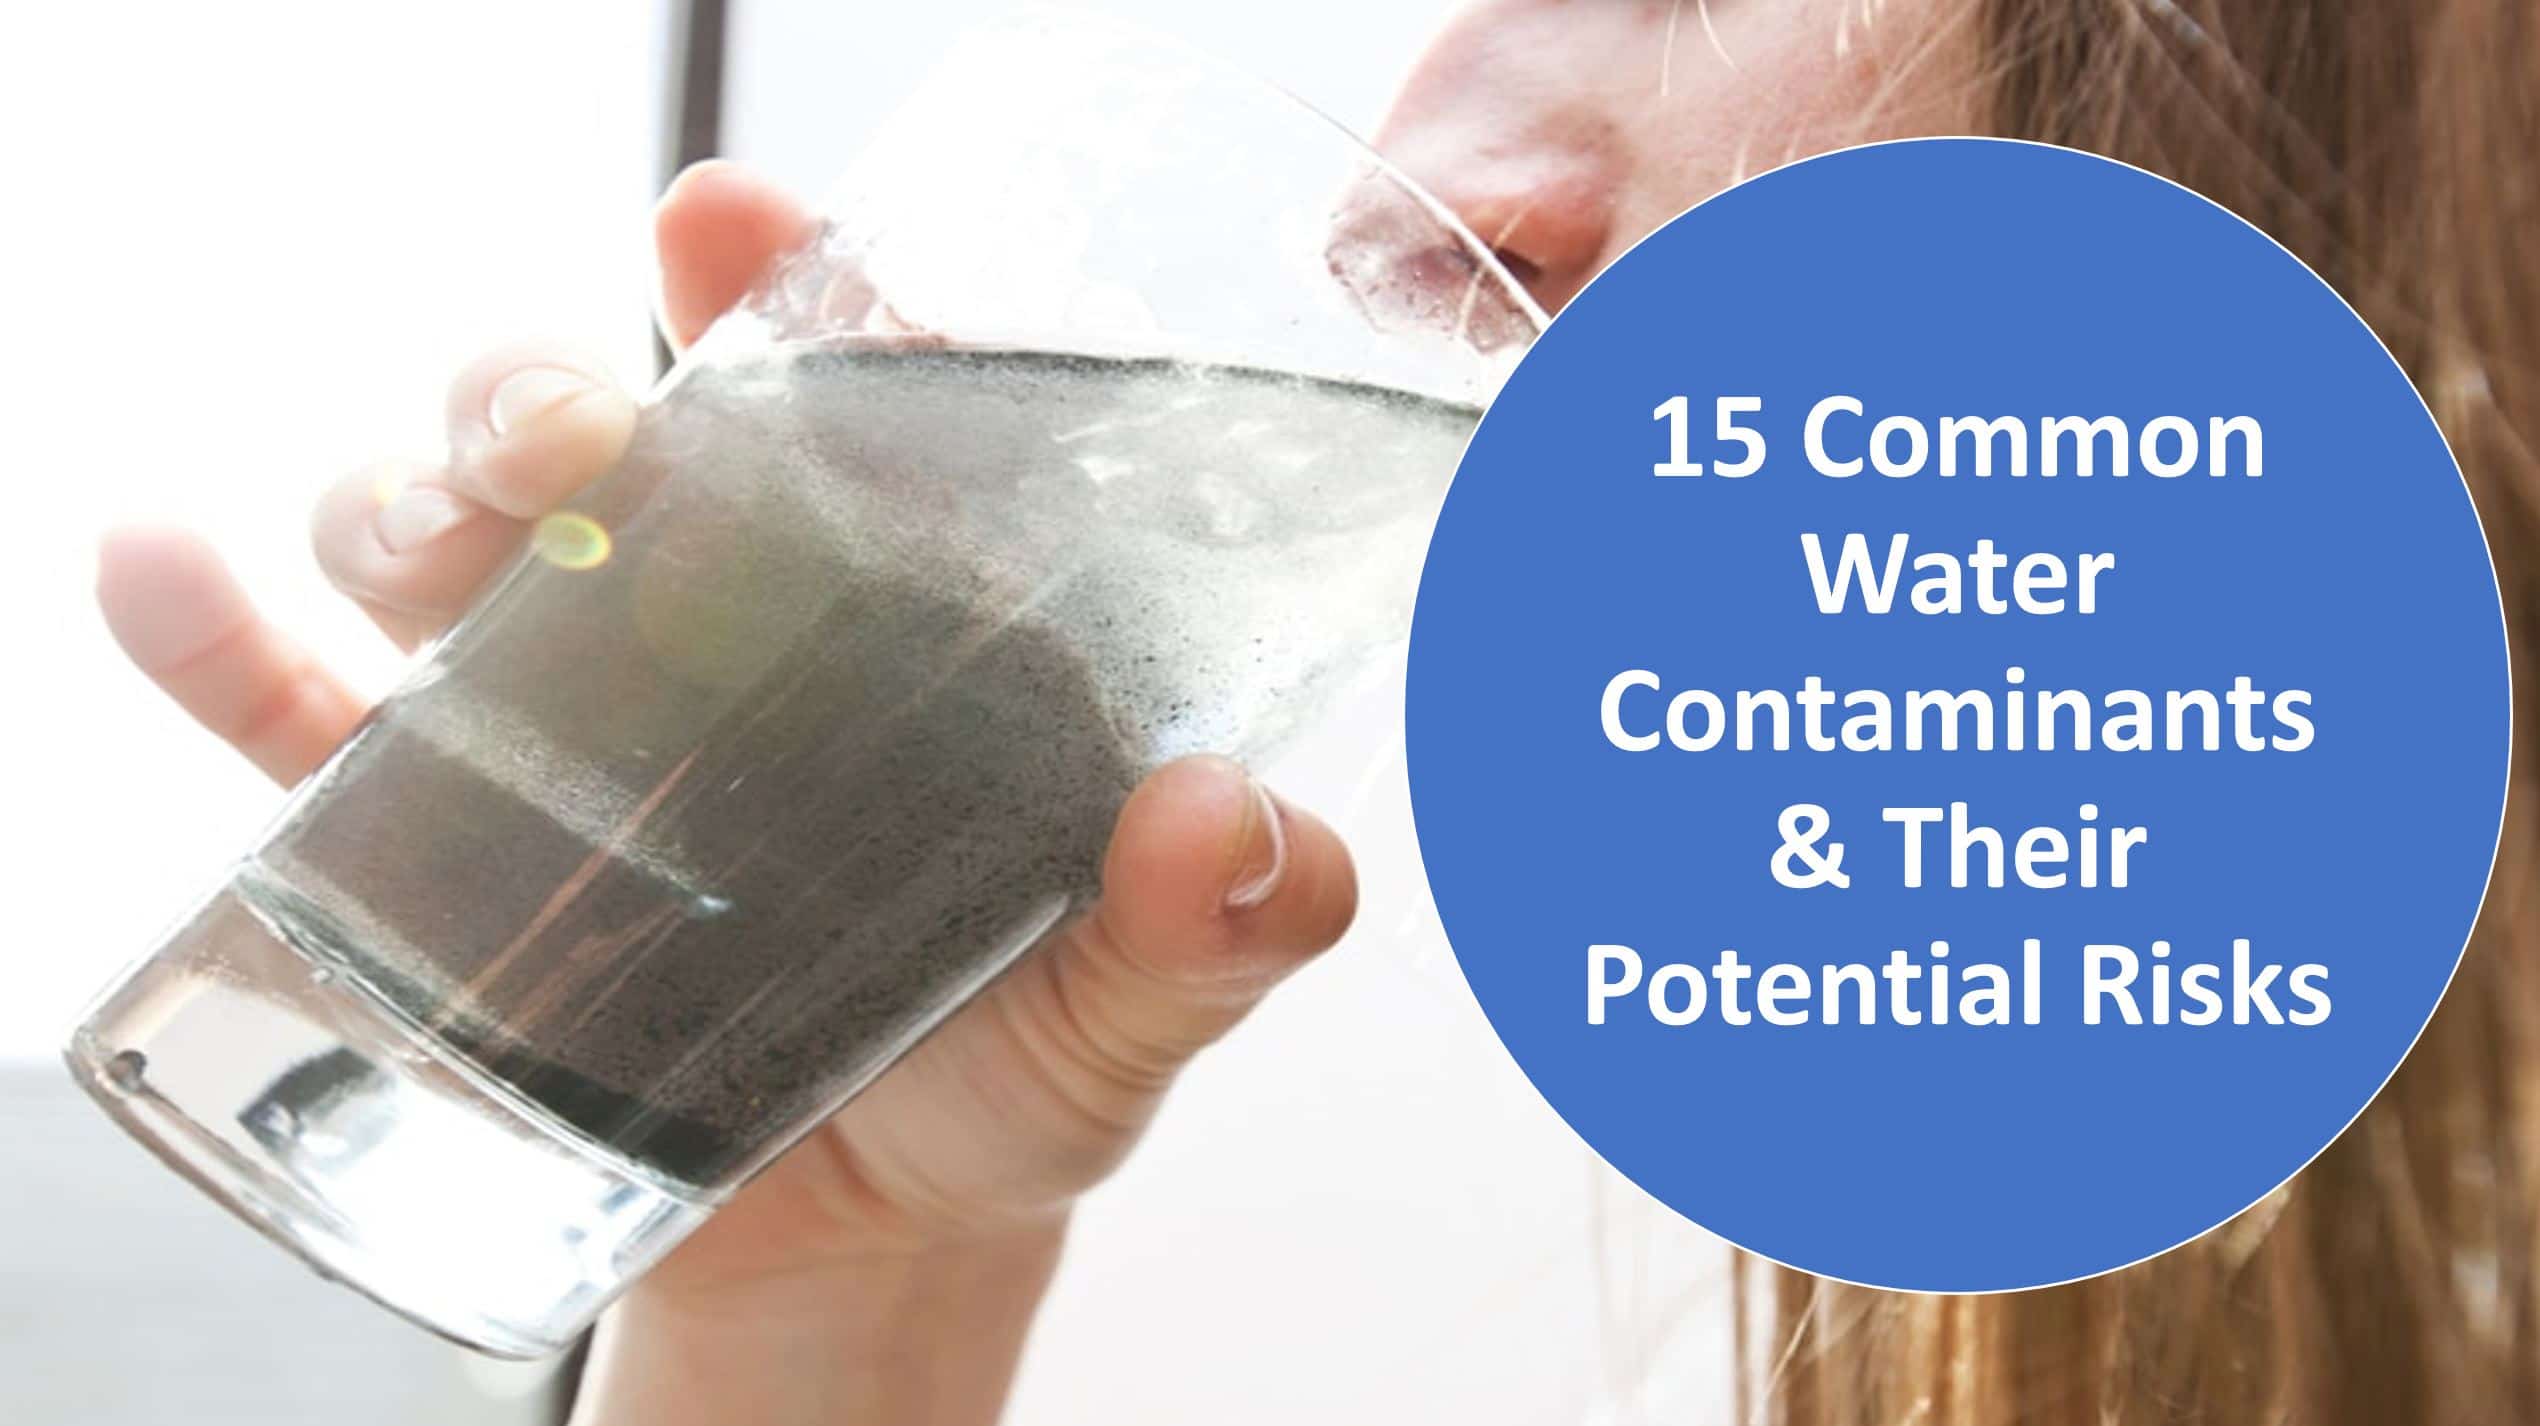 15 Common Water Contaminants & Their Potential Risks